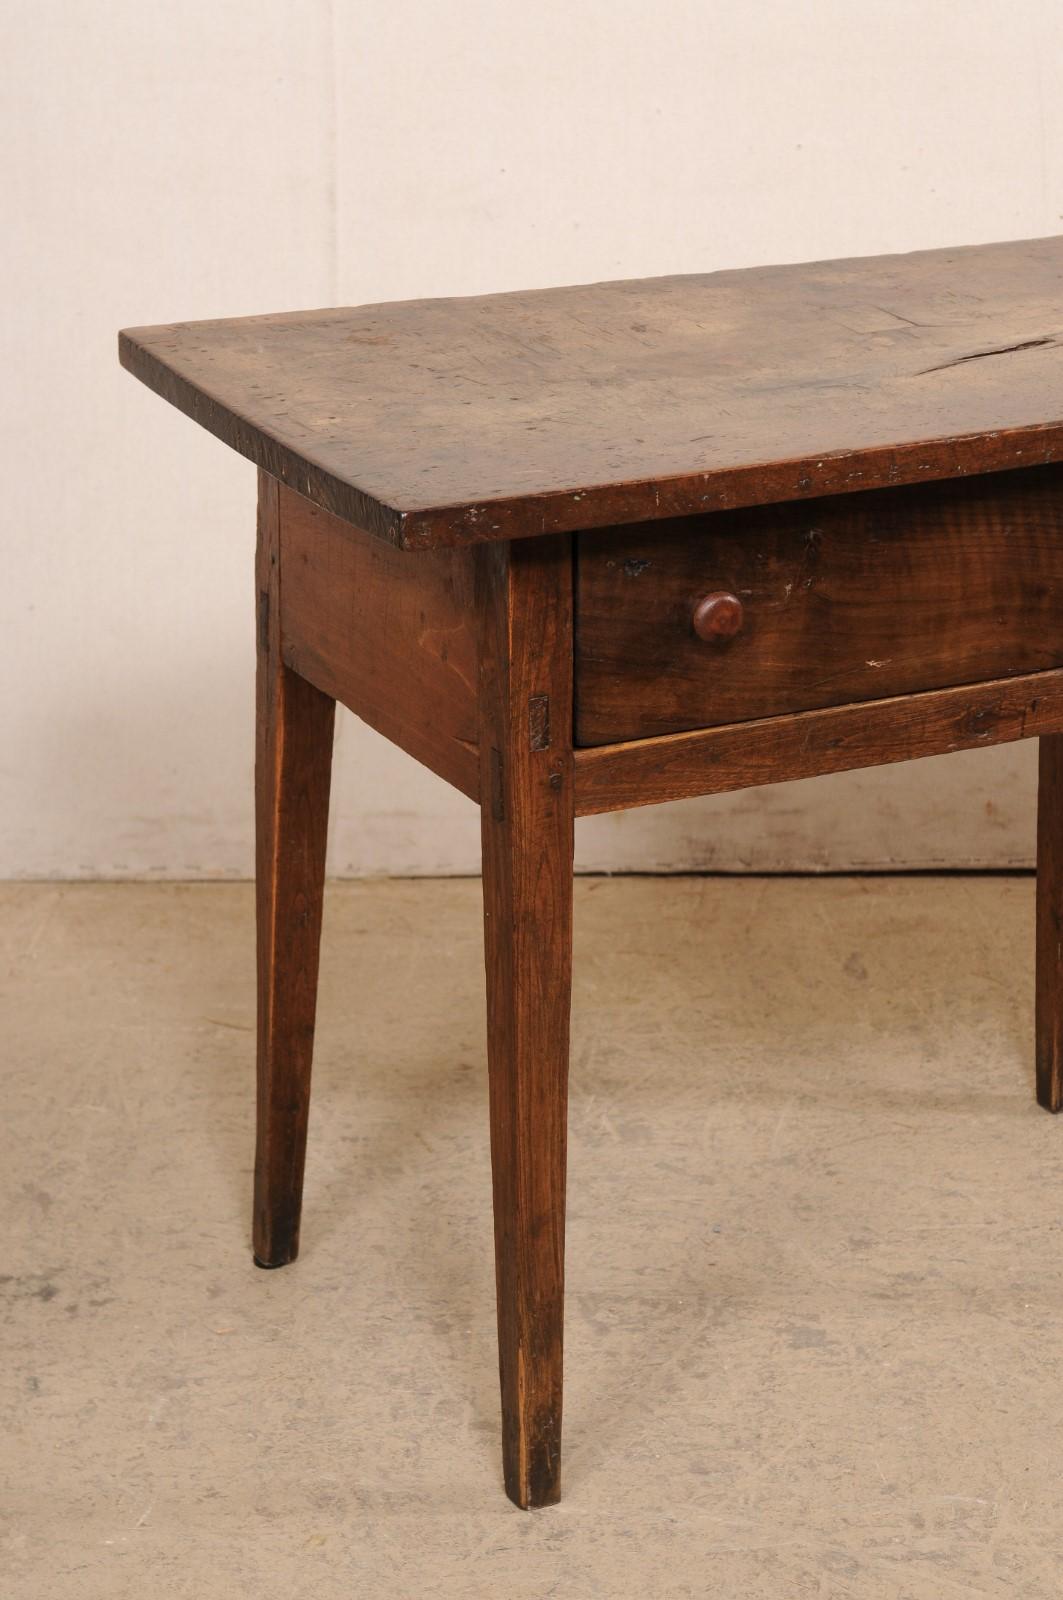 18th C. Spanish Carved-Walnut Table w/Drawer (Top has Fabulous Old Patina!) In Good Condition For Sale In Atlanta, GA